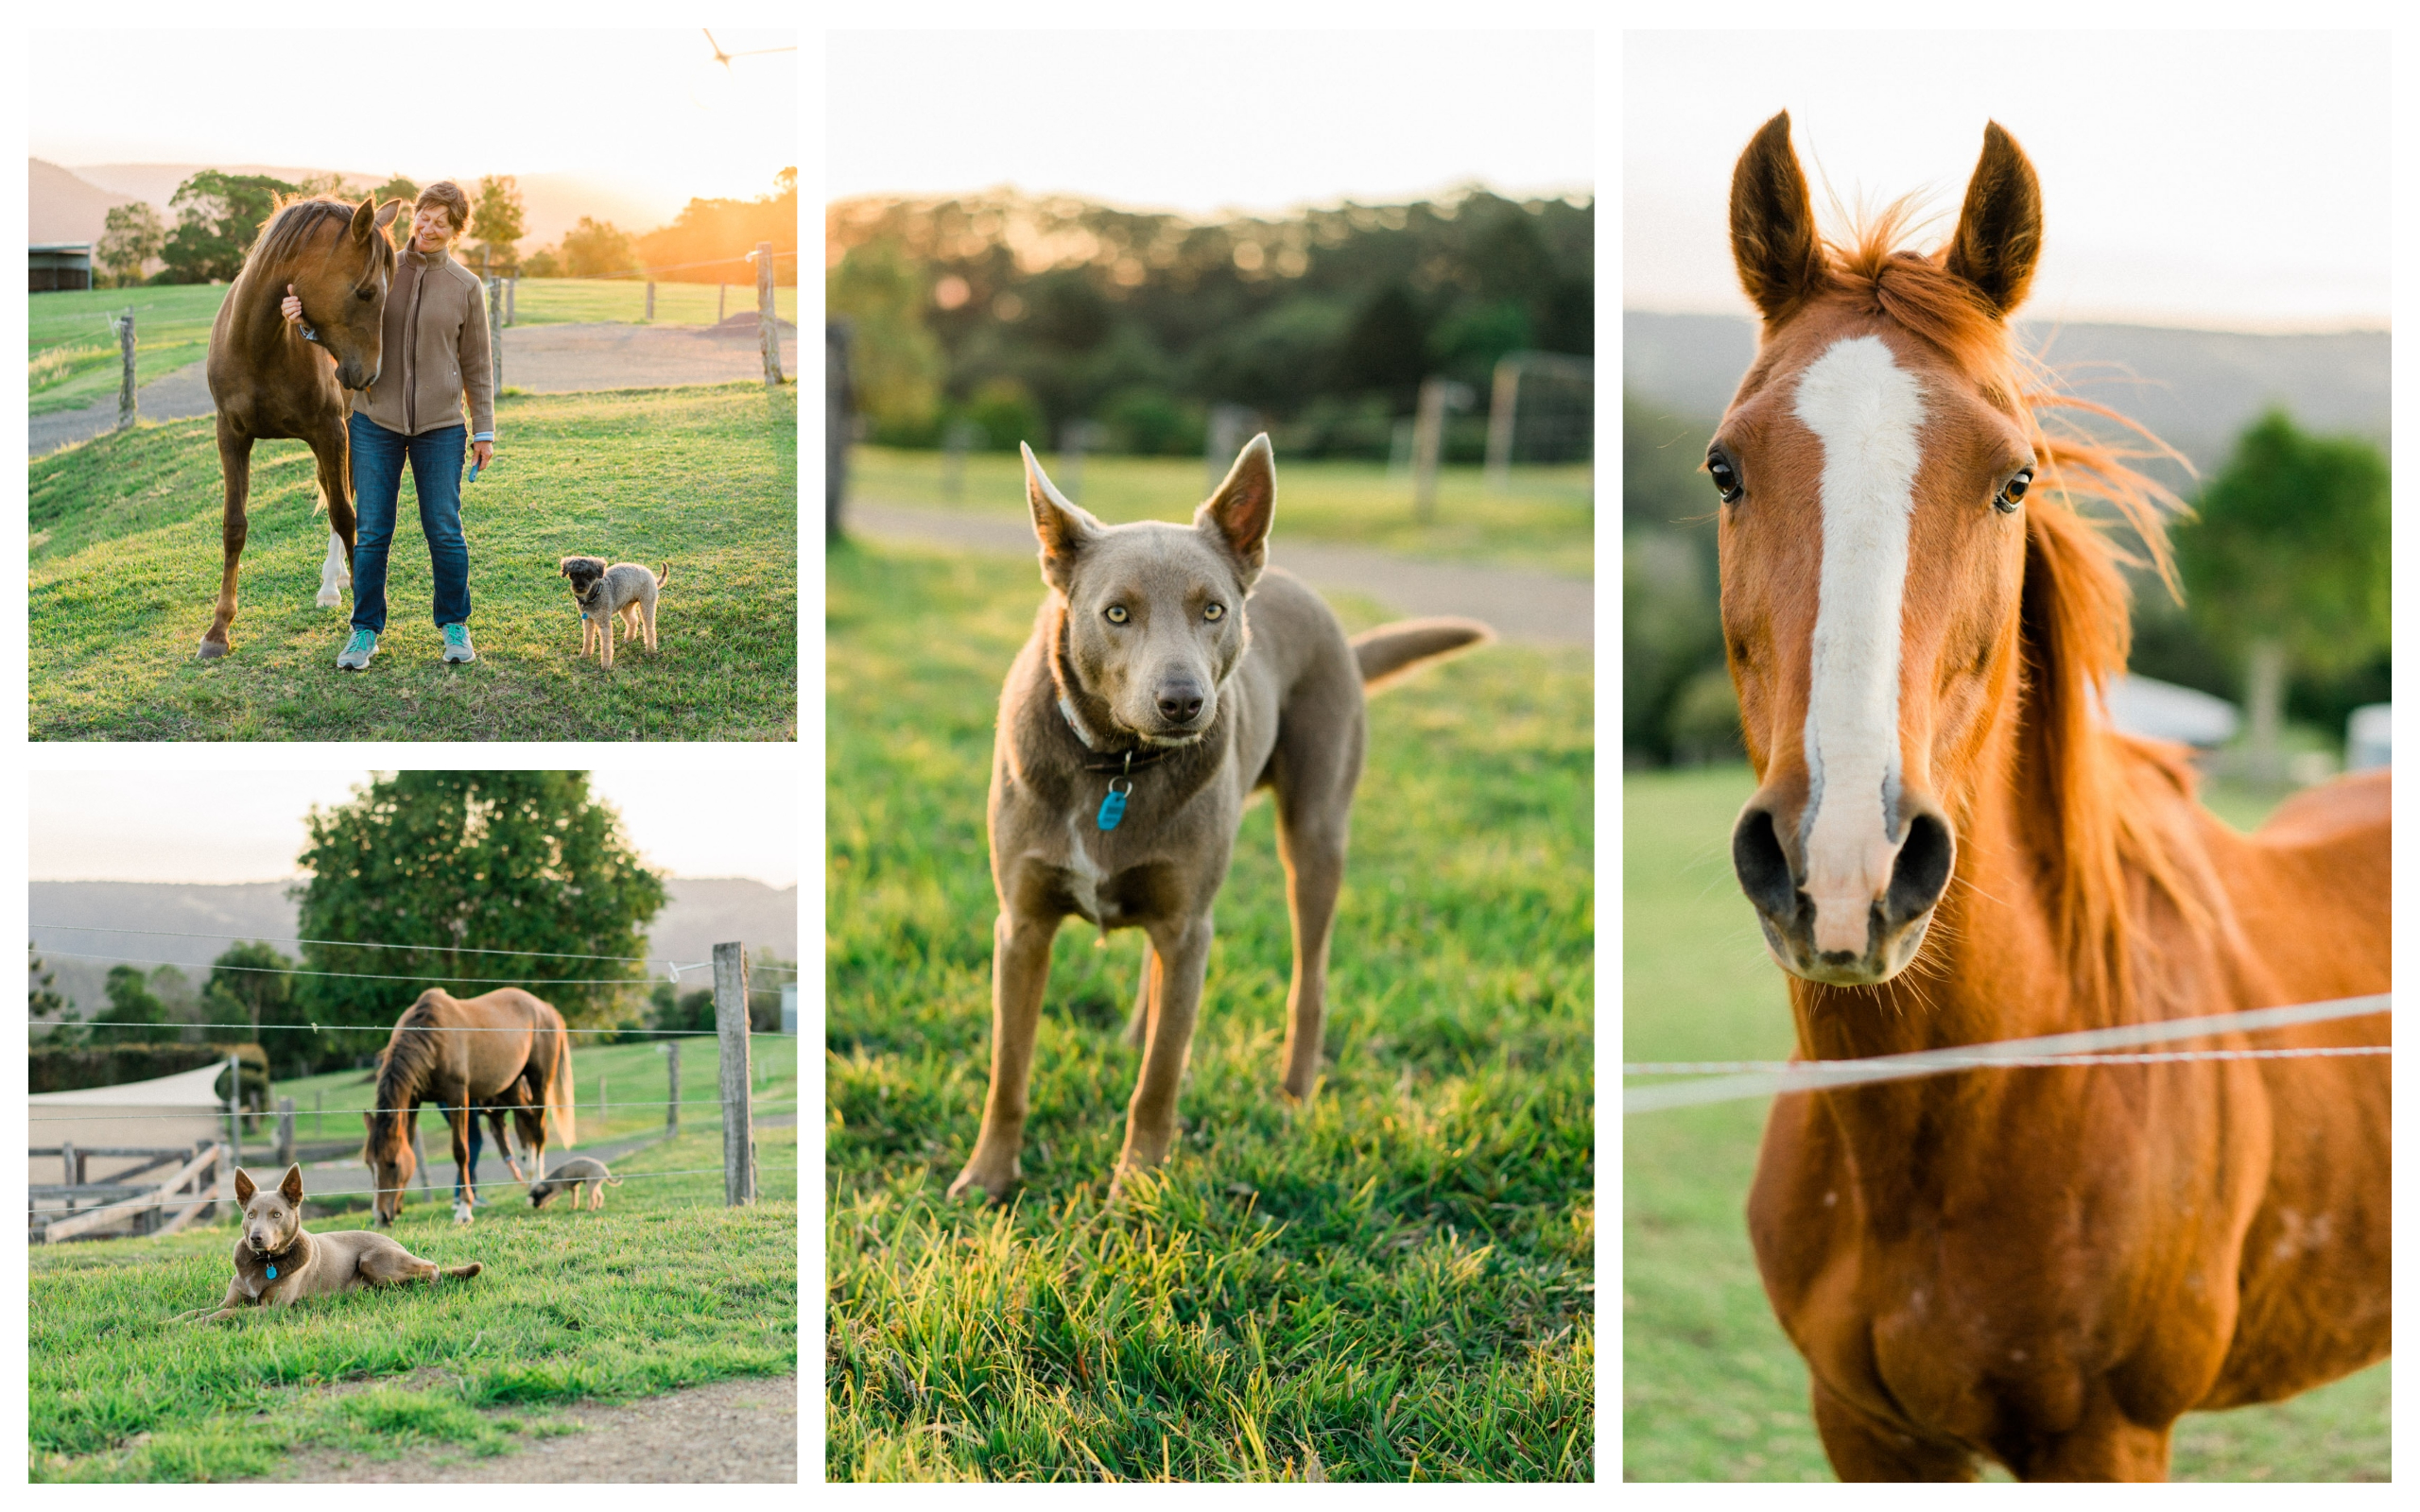 Visiting Australia, Maleny, The Sunshine Coast, international travel blog. Sunset at The Space Between, a horse farm Airbnb. Horses and dogs.